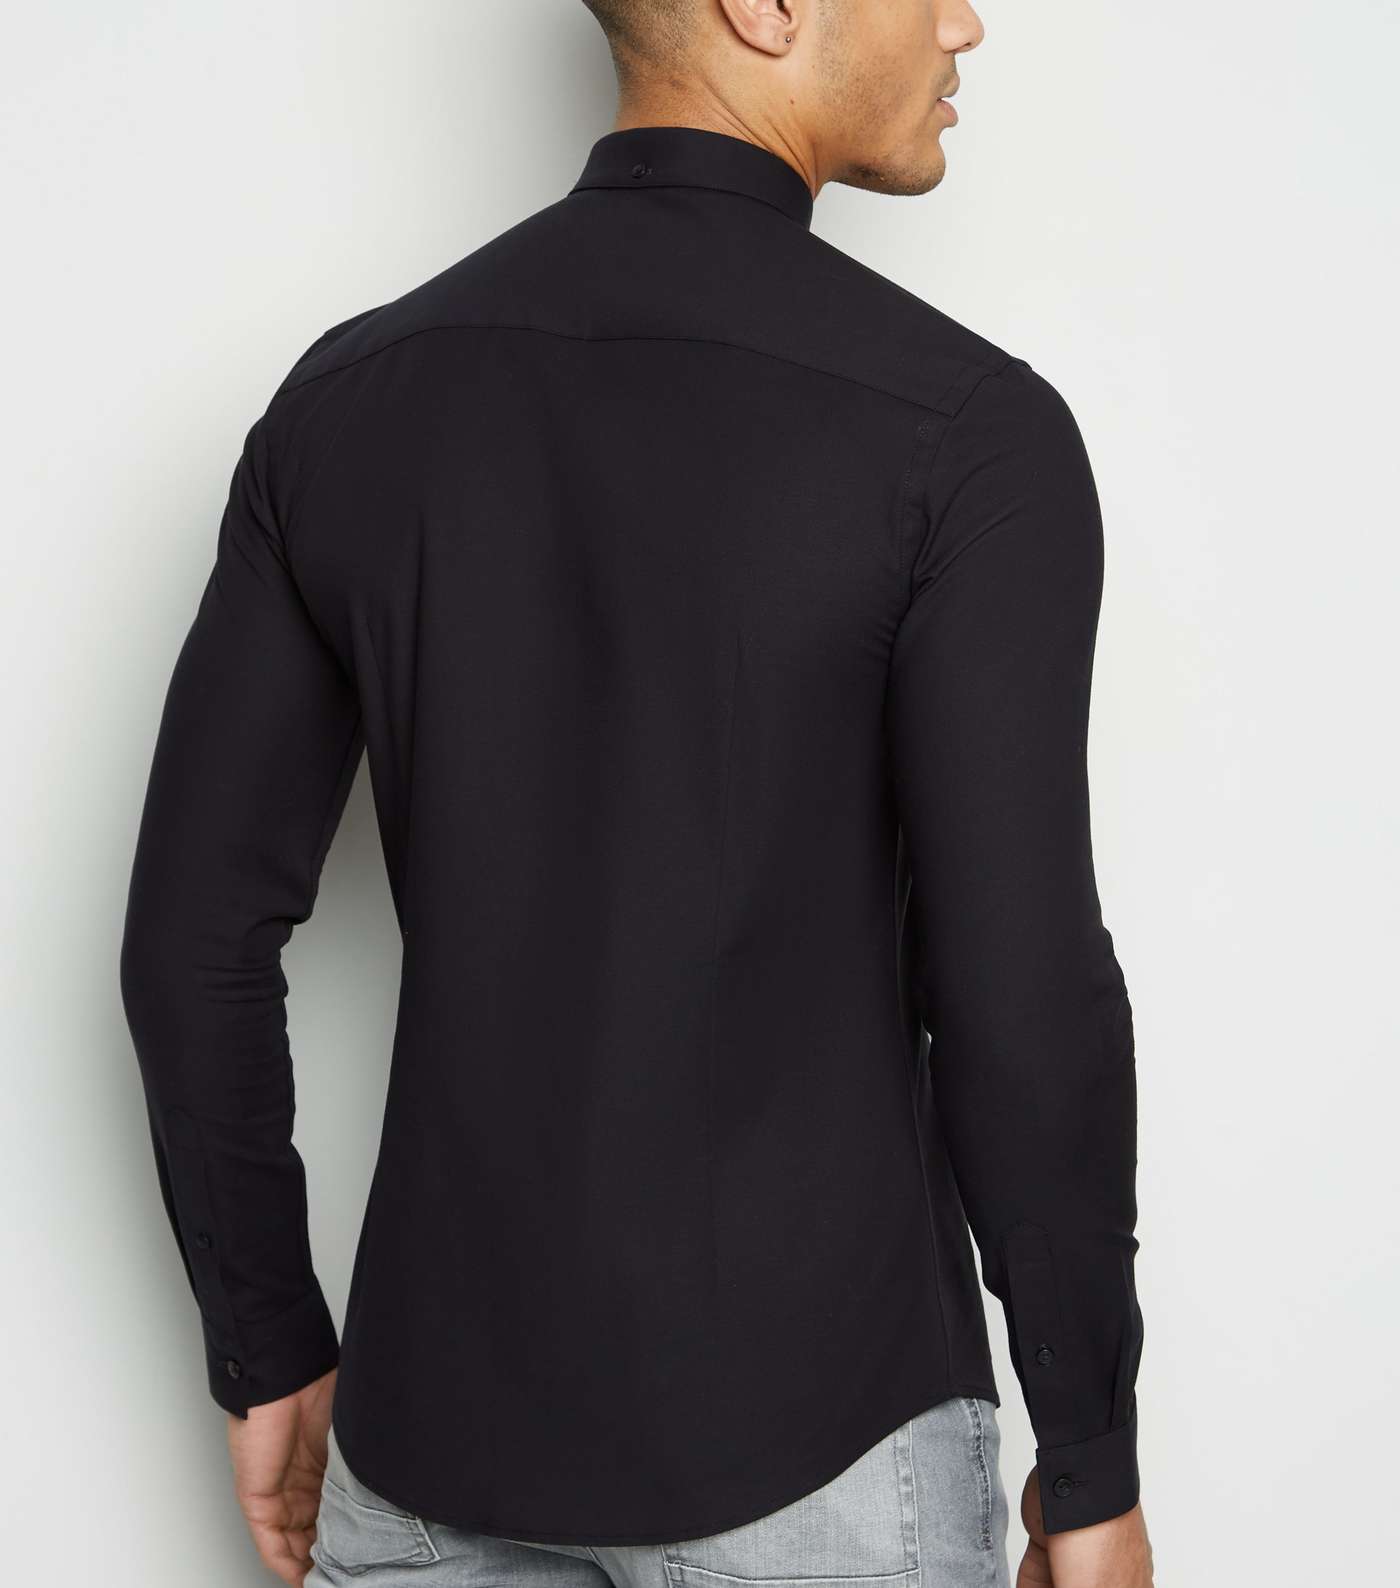 Black Muscle Fit Long Sleeve Oxford Shirt Image 3